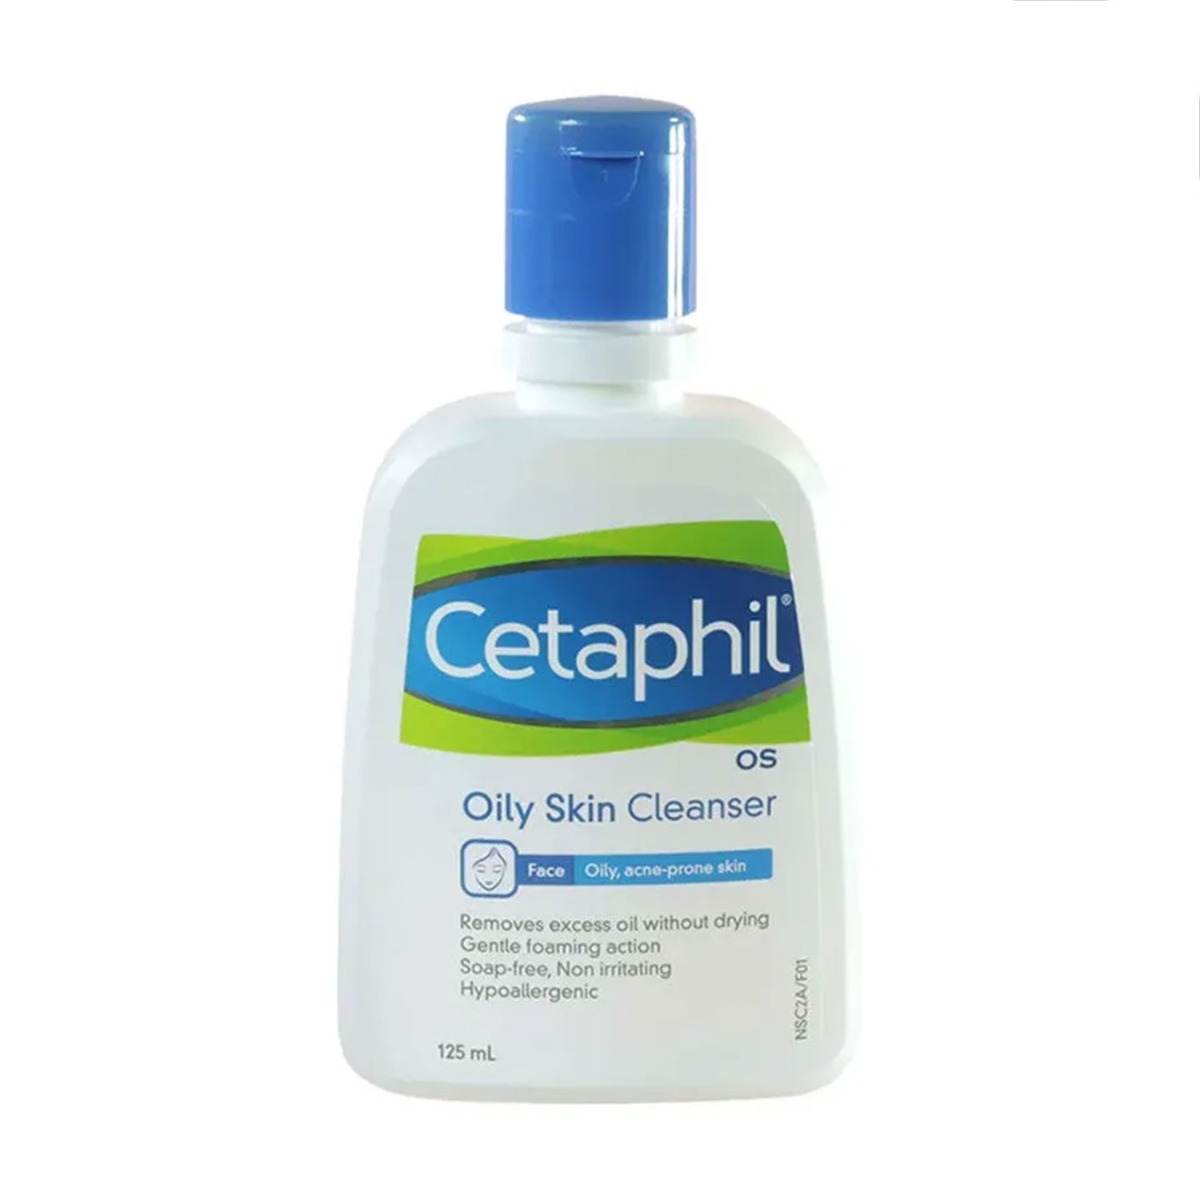 Cetaphil Oily skin cleanser For Face, 125ml